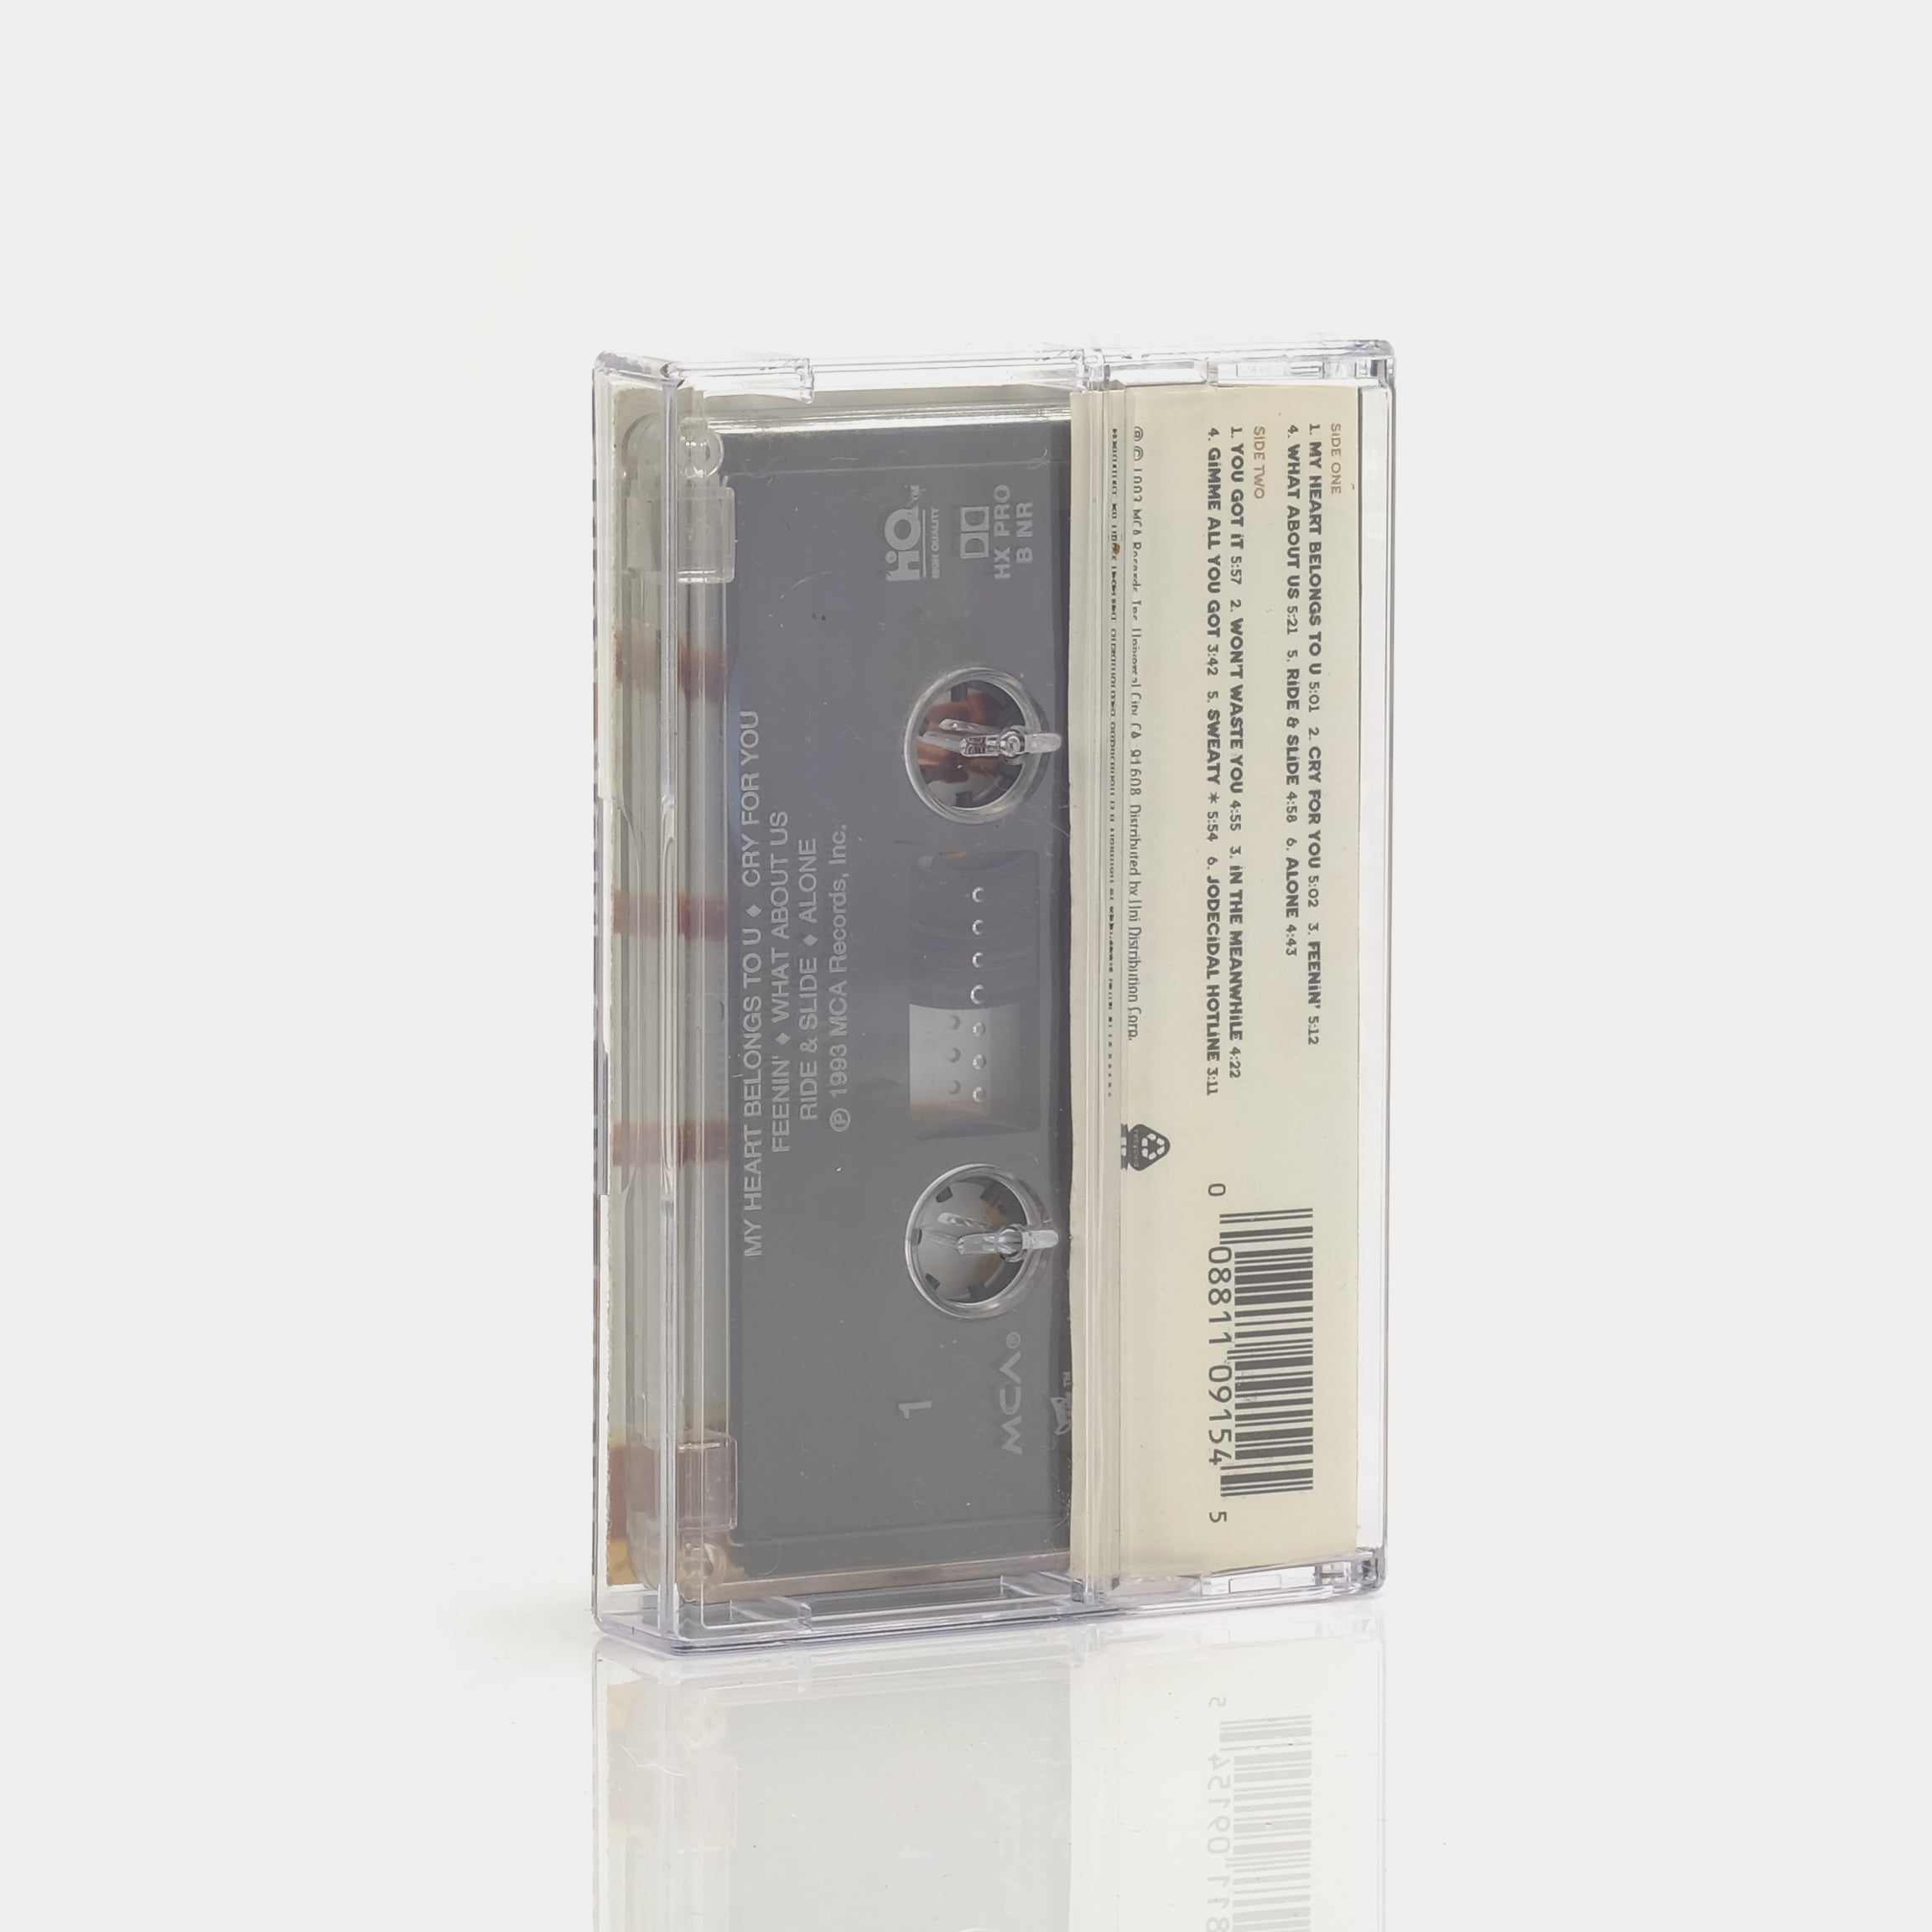 Jodeci - Diary Of A Mad Band Cassette Tape